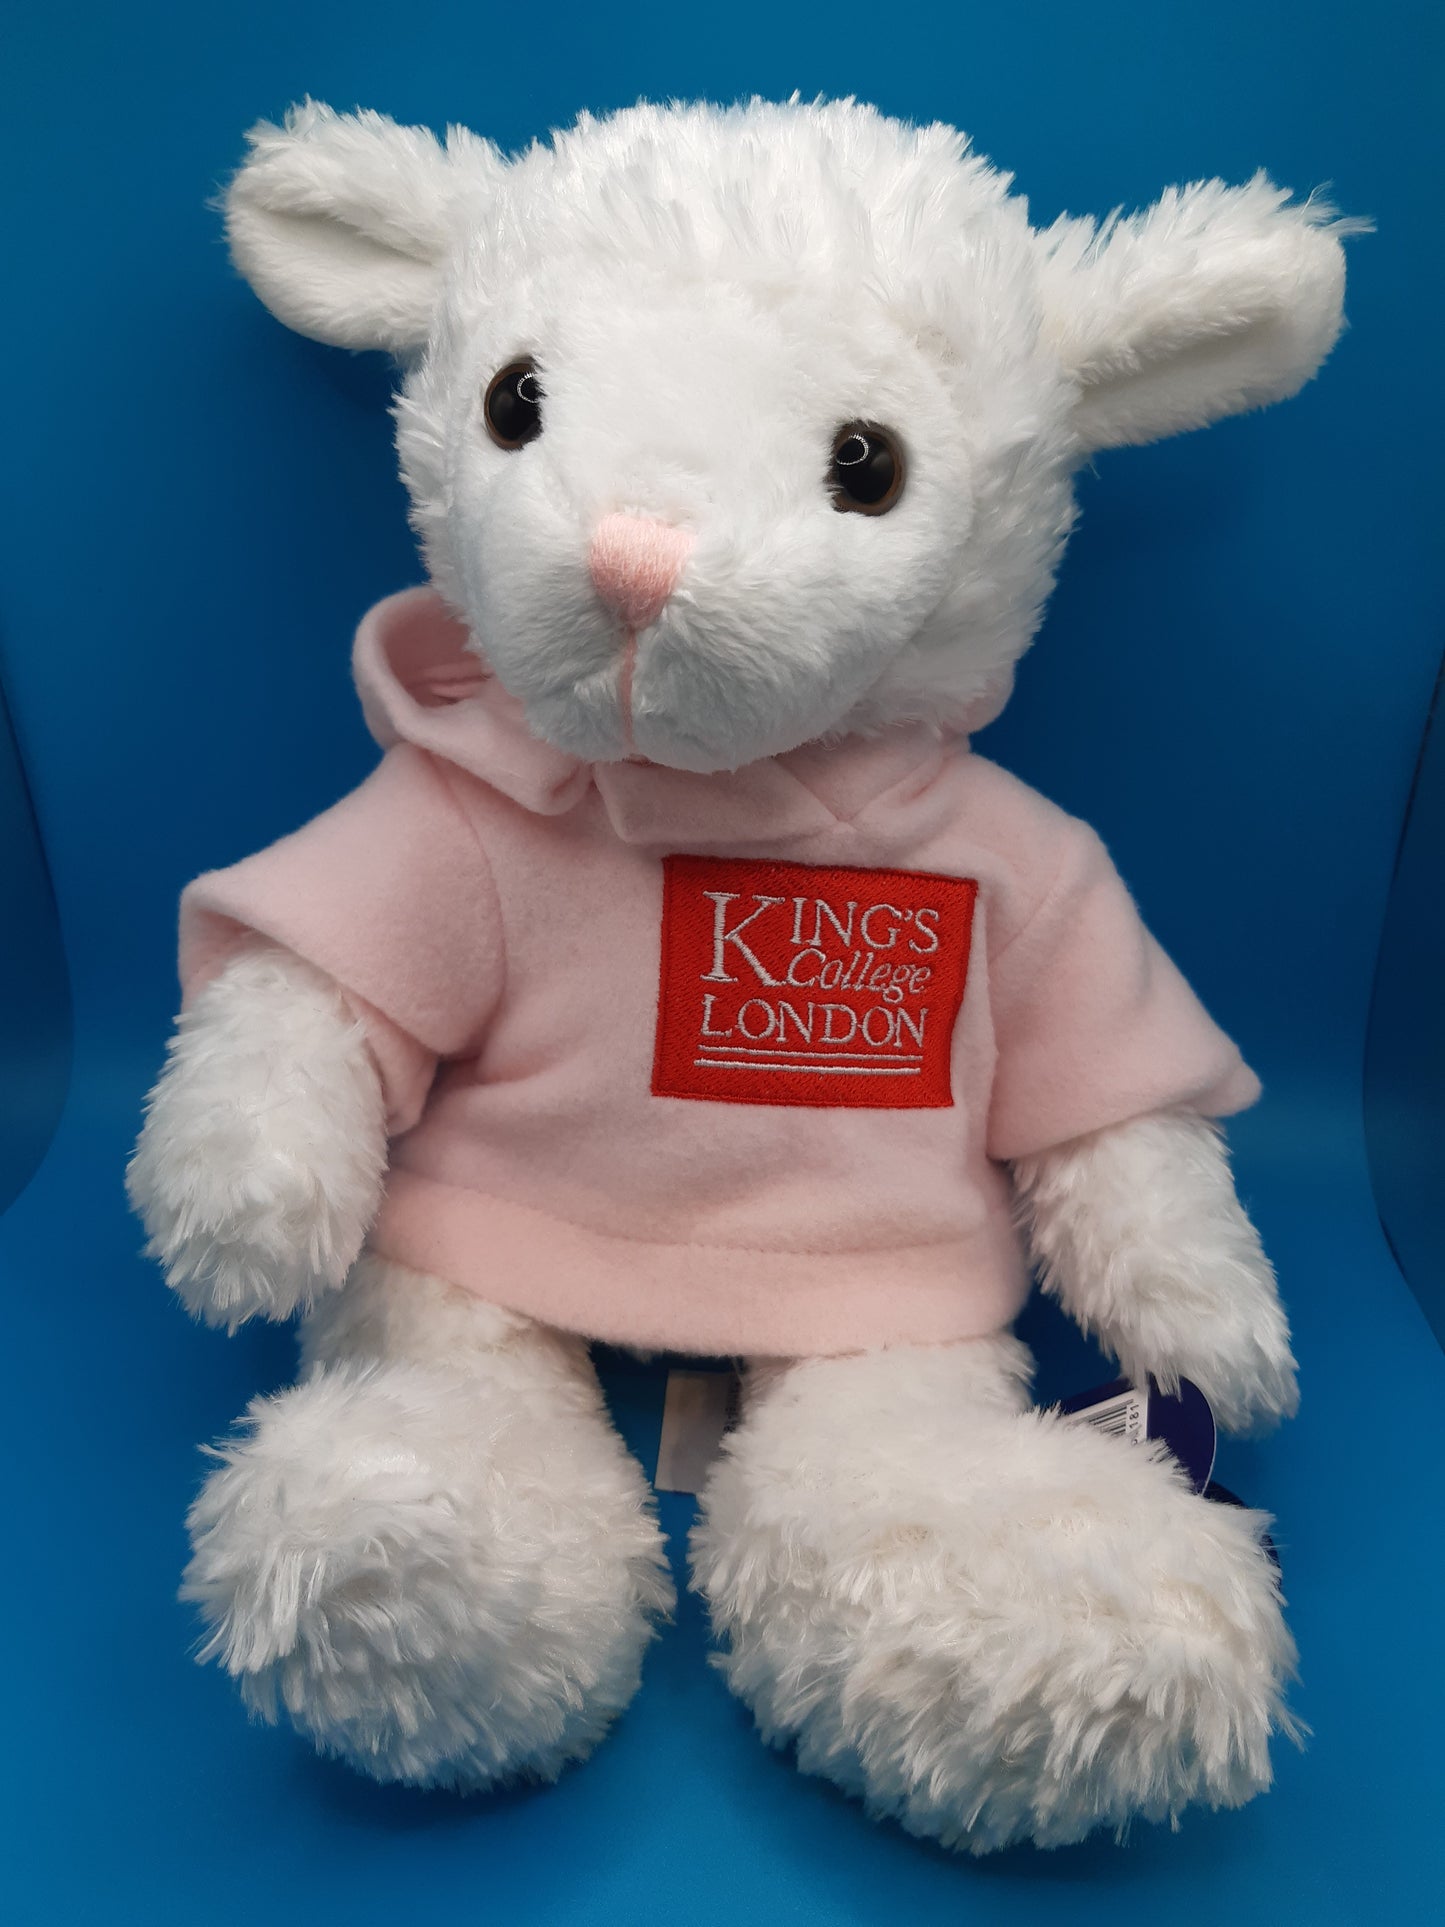 King's College London Larry Lamb Soft Toy